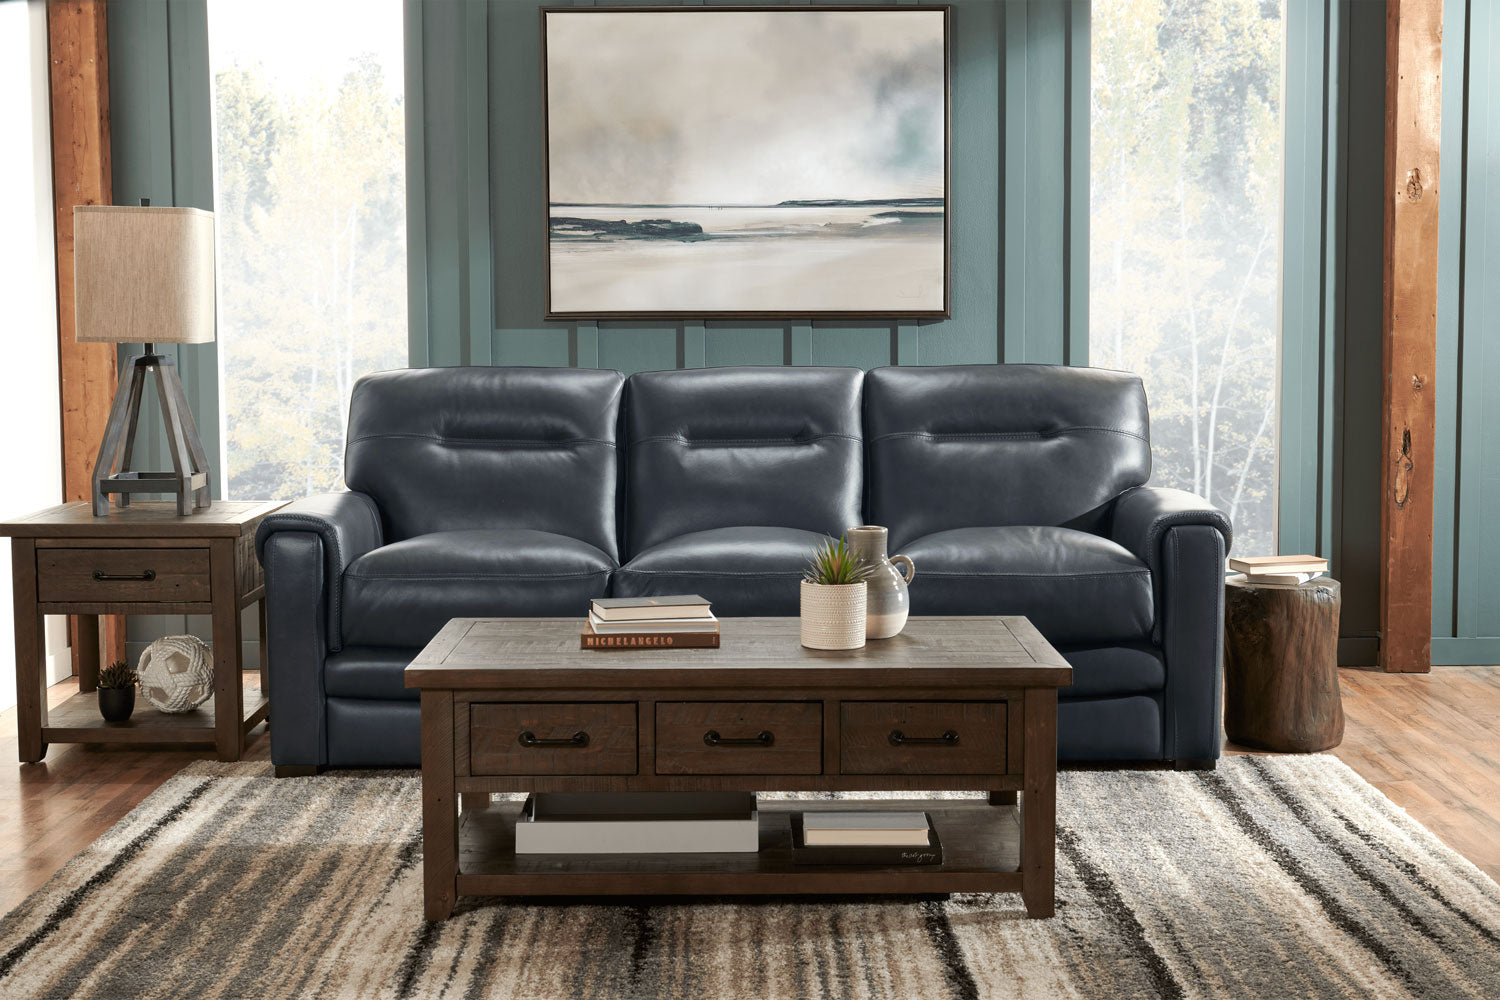 Cindy Crawford leather sofa, loveseat, and chair collection in living room